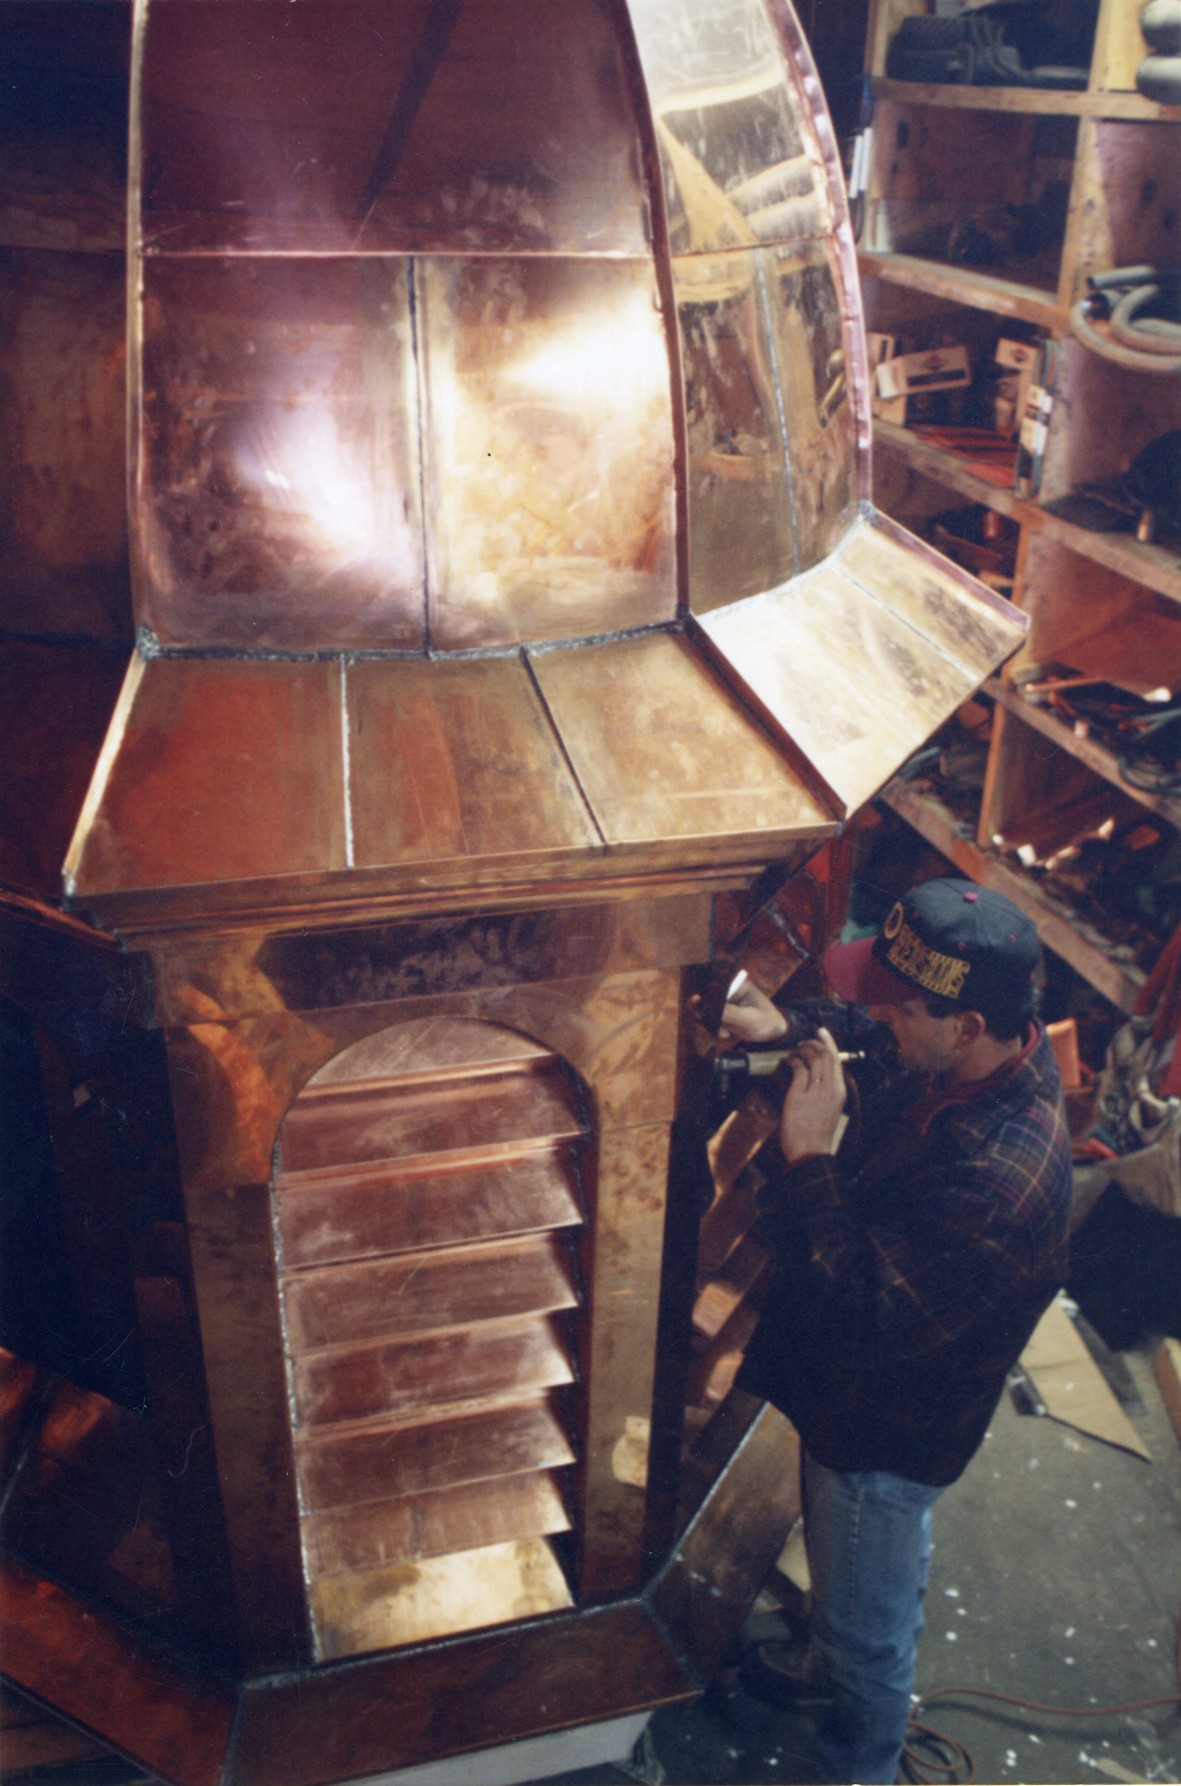 Copper clad cupola and dome